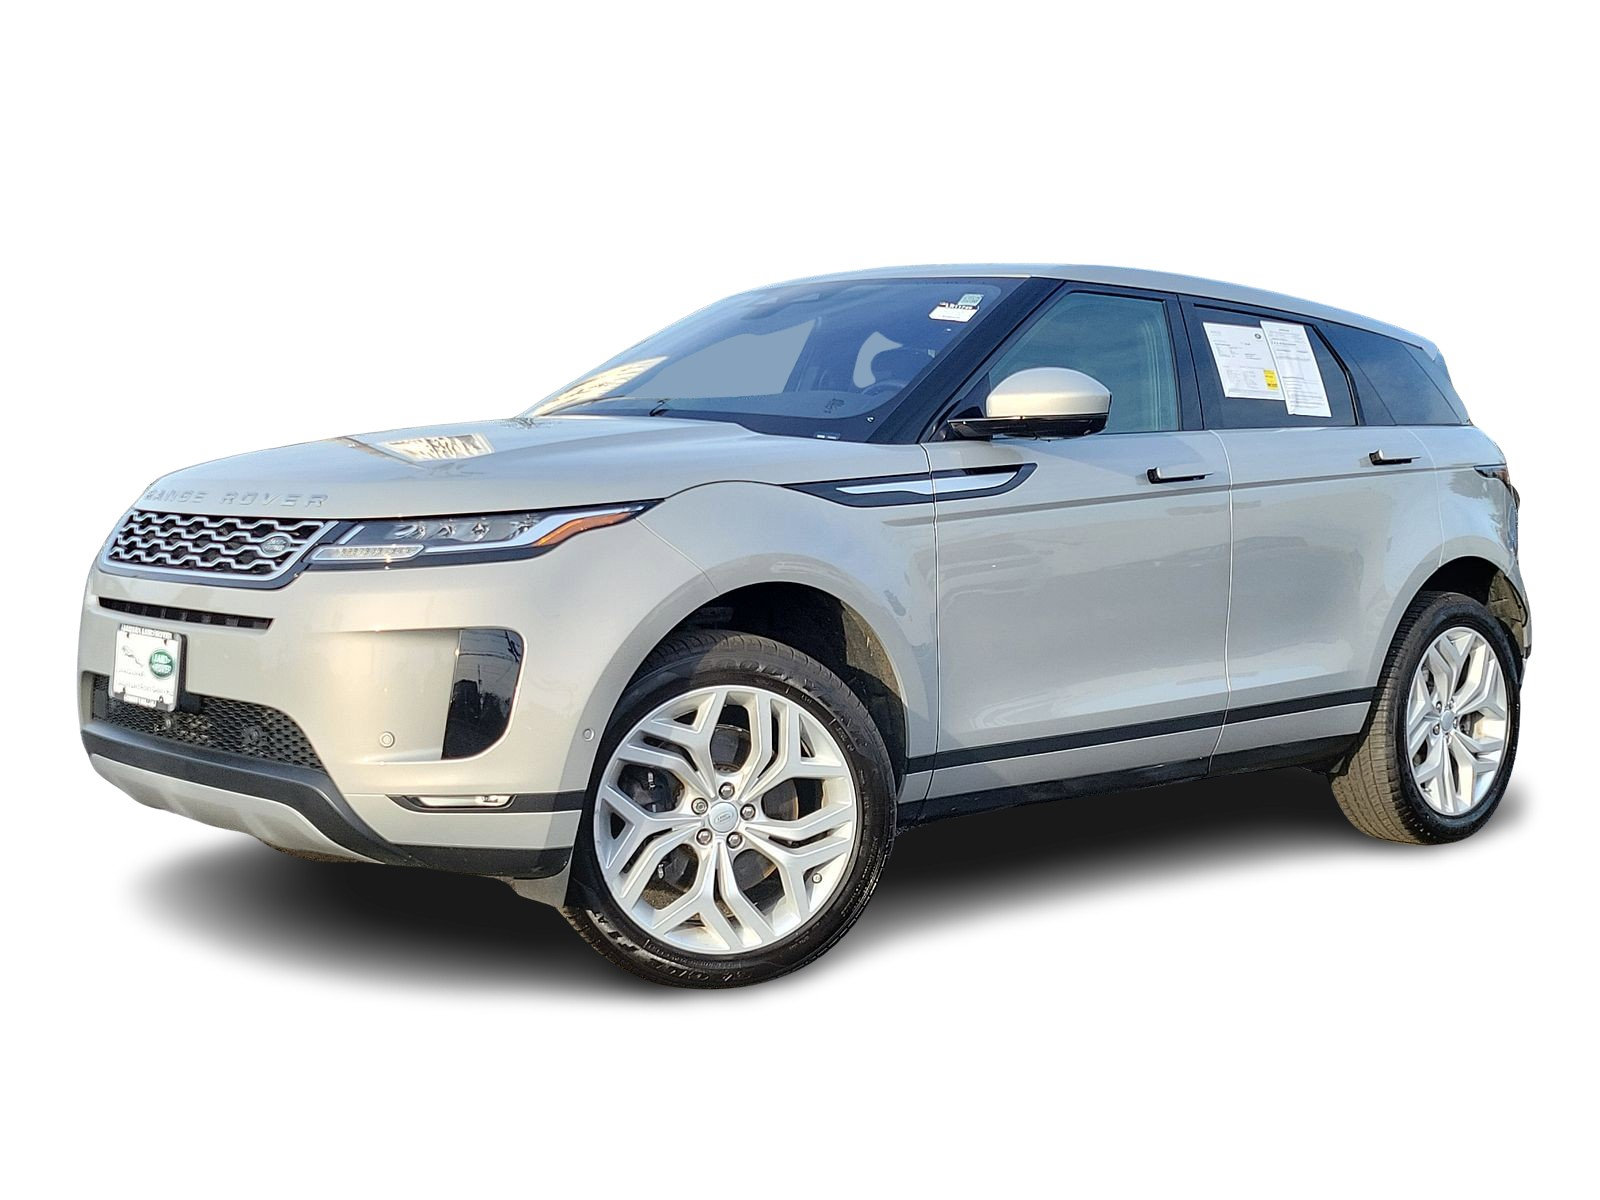 Certified Pre-Owned 2021 Land Rover Range Rover Evoque S 4 Door in Cherry  Hill #LR11749 | Land Rover Cherry Hill